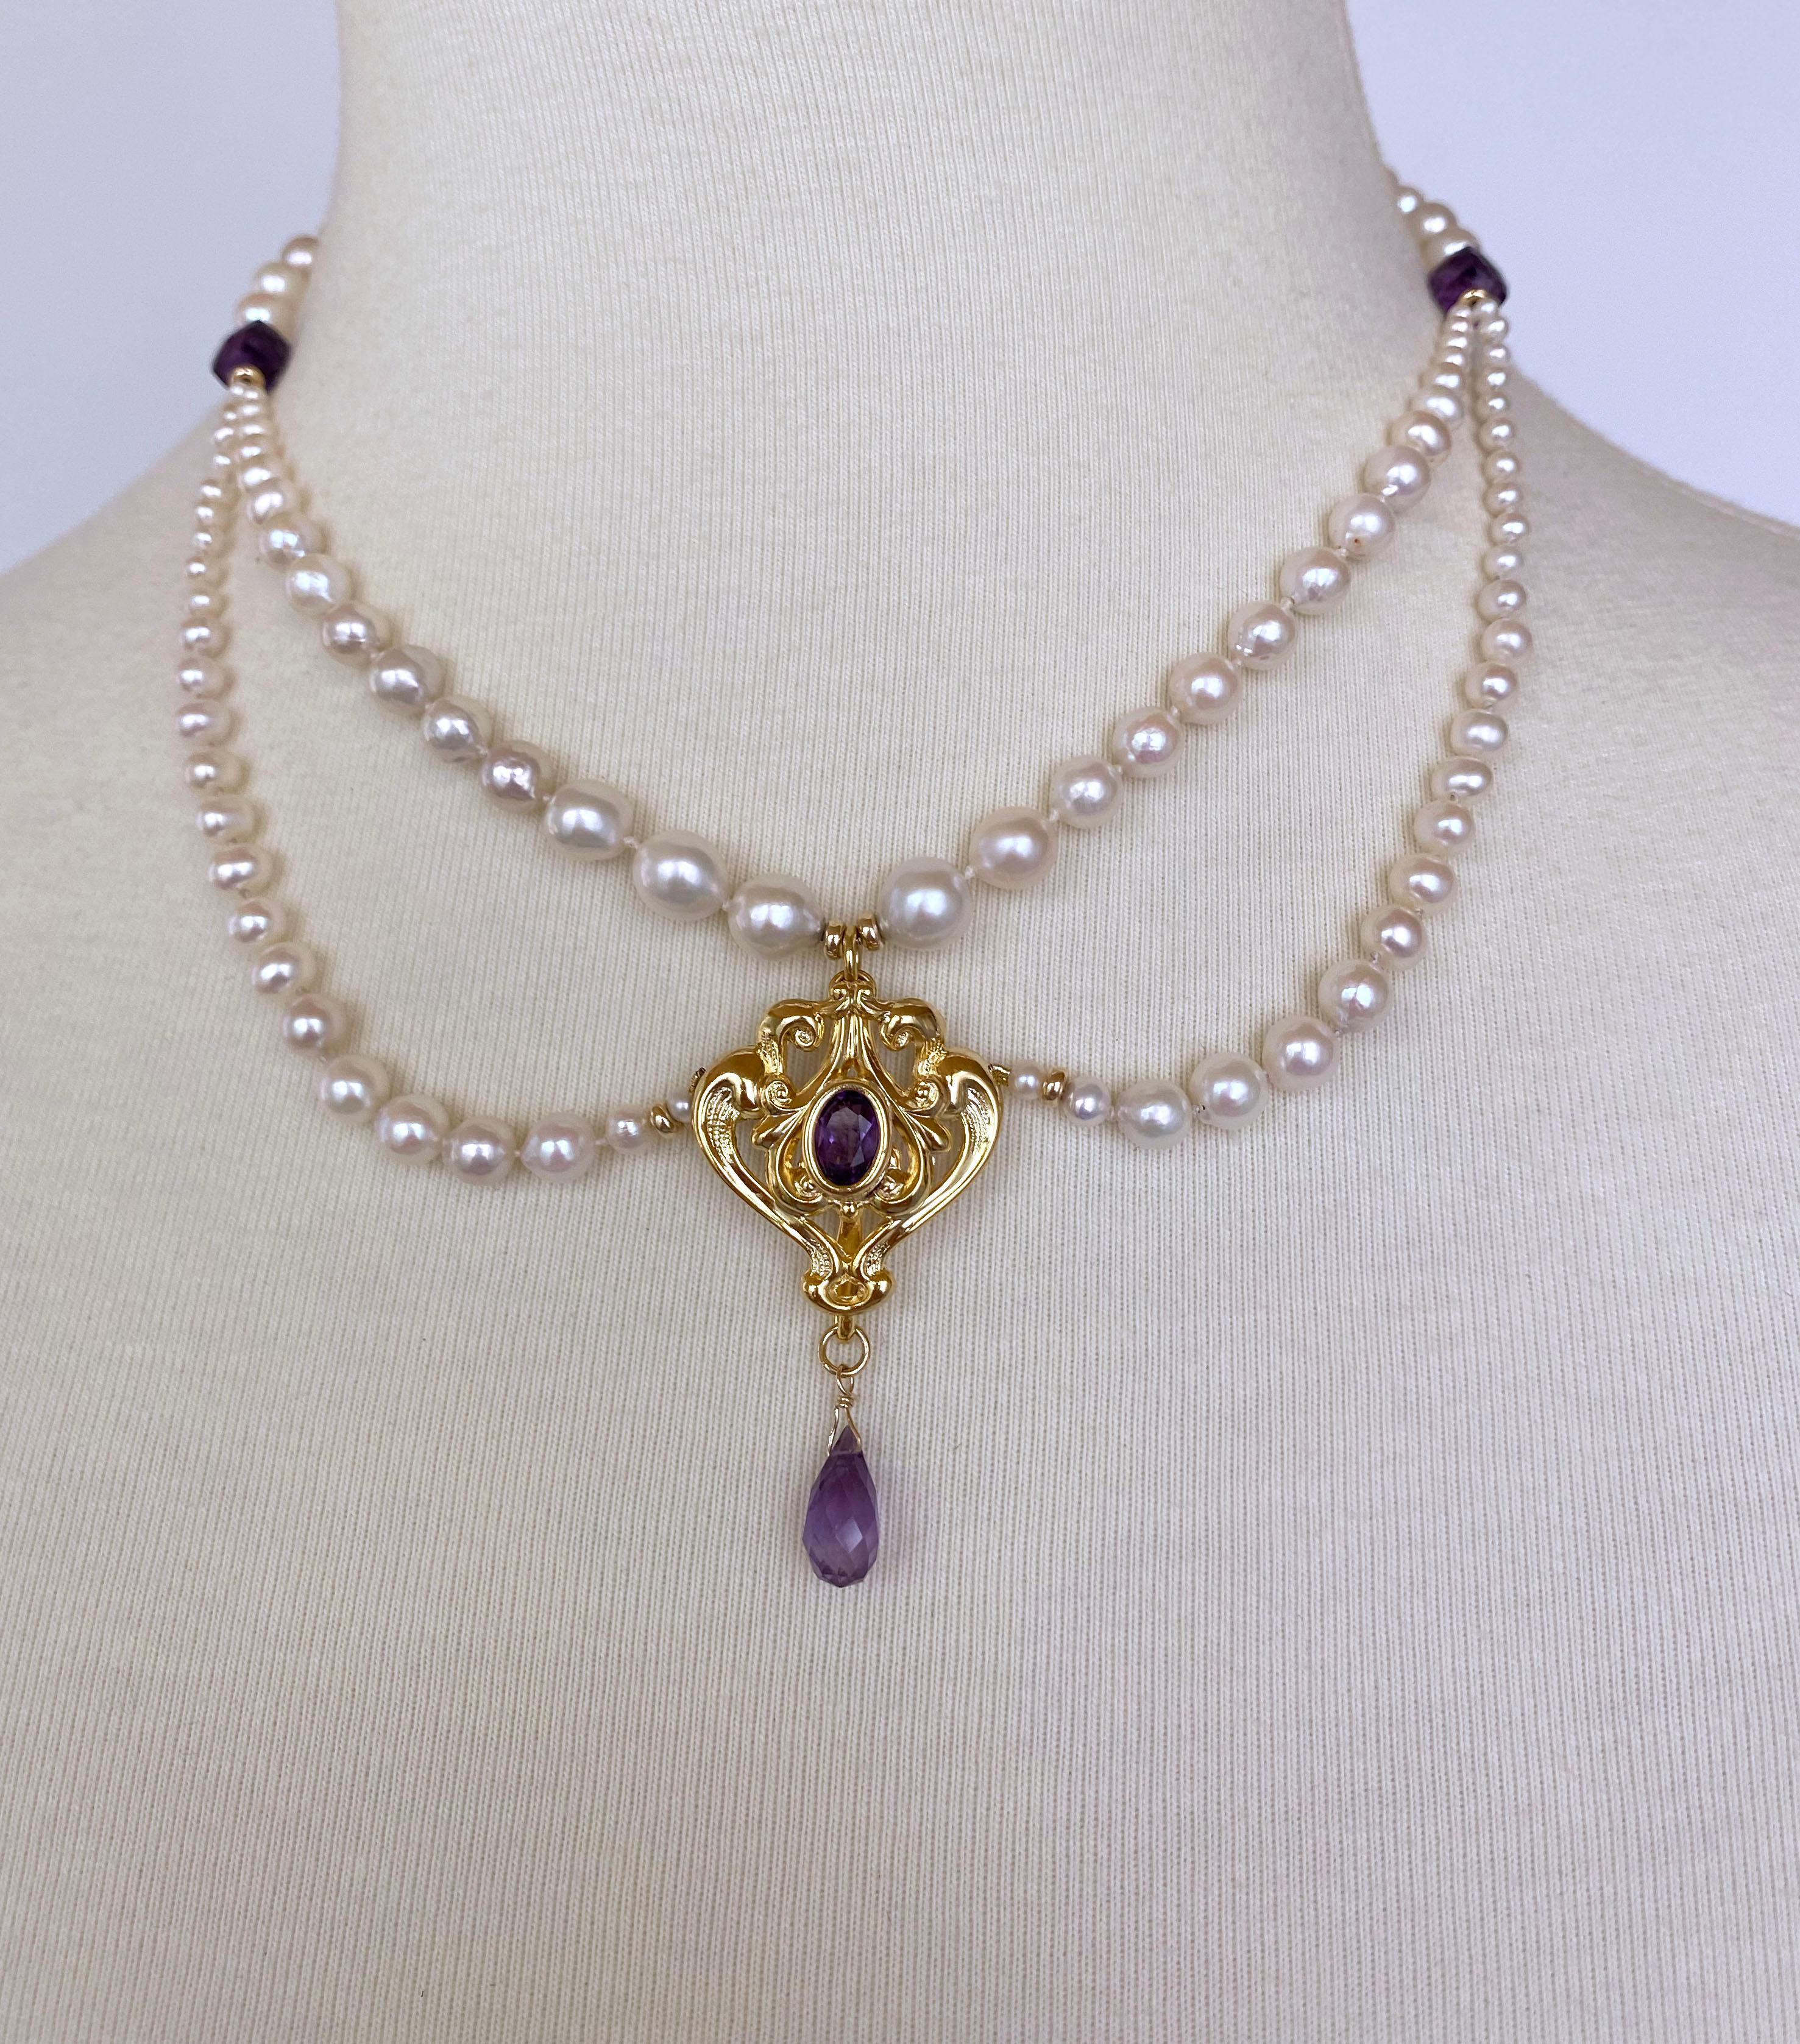 Beautifully hand made by Marina J. This necklace features a high shine and high polish 18K Yellow Gold Plating over a vintage 9K Victorian Pendant, restored into a centerpiece displaying a vibrant Amethyst setting, and teardrop Briolette. Strung